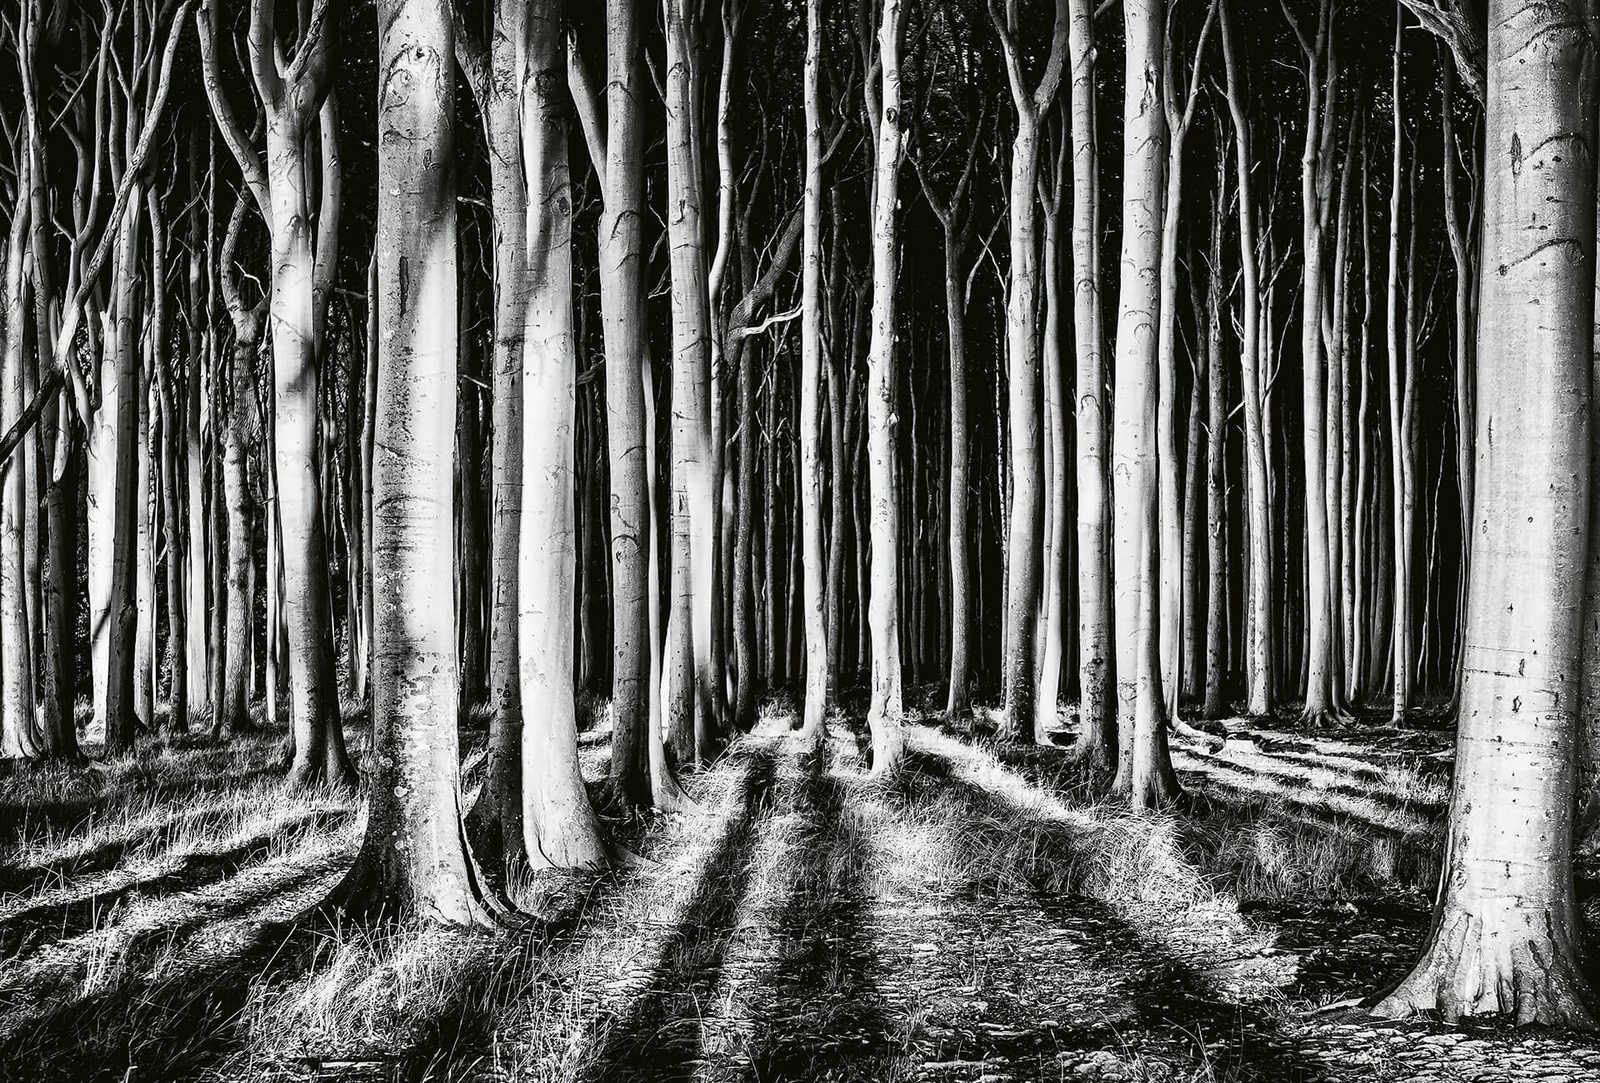 Photo wallpaper nature ghost forest - black, white, grey
